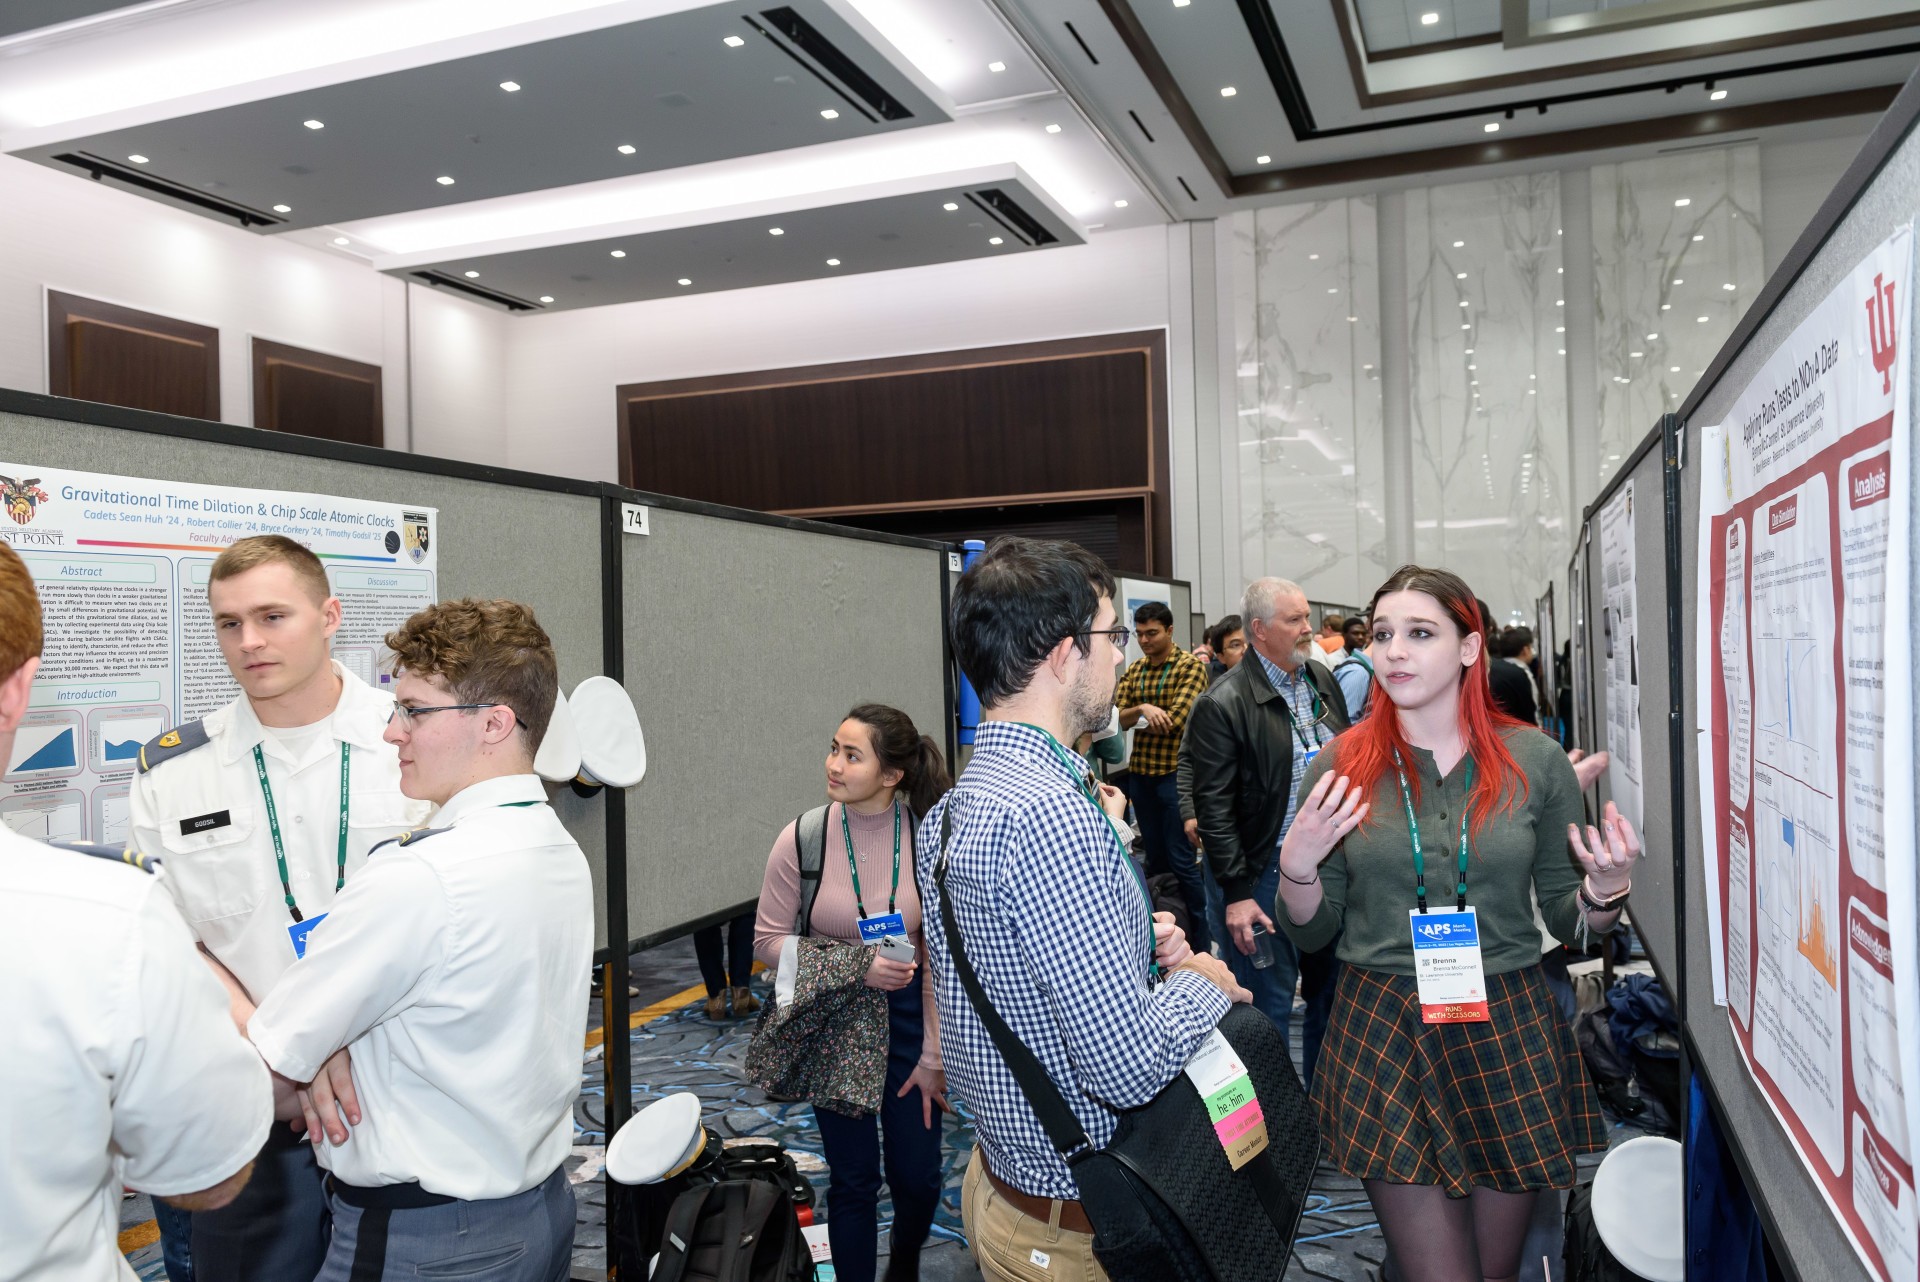 Students presenting their posters in the March Meeting exhibit hall